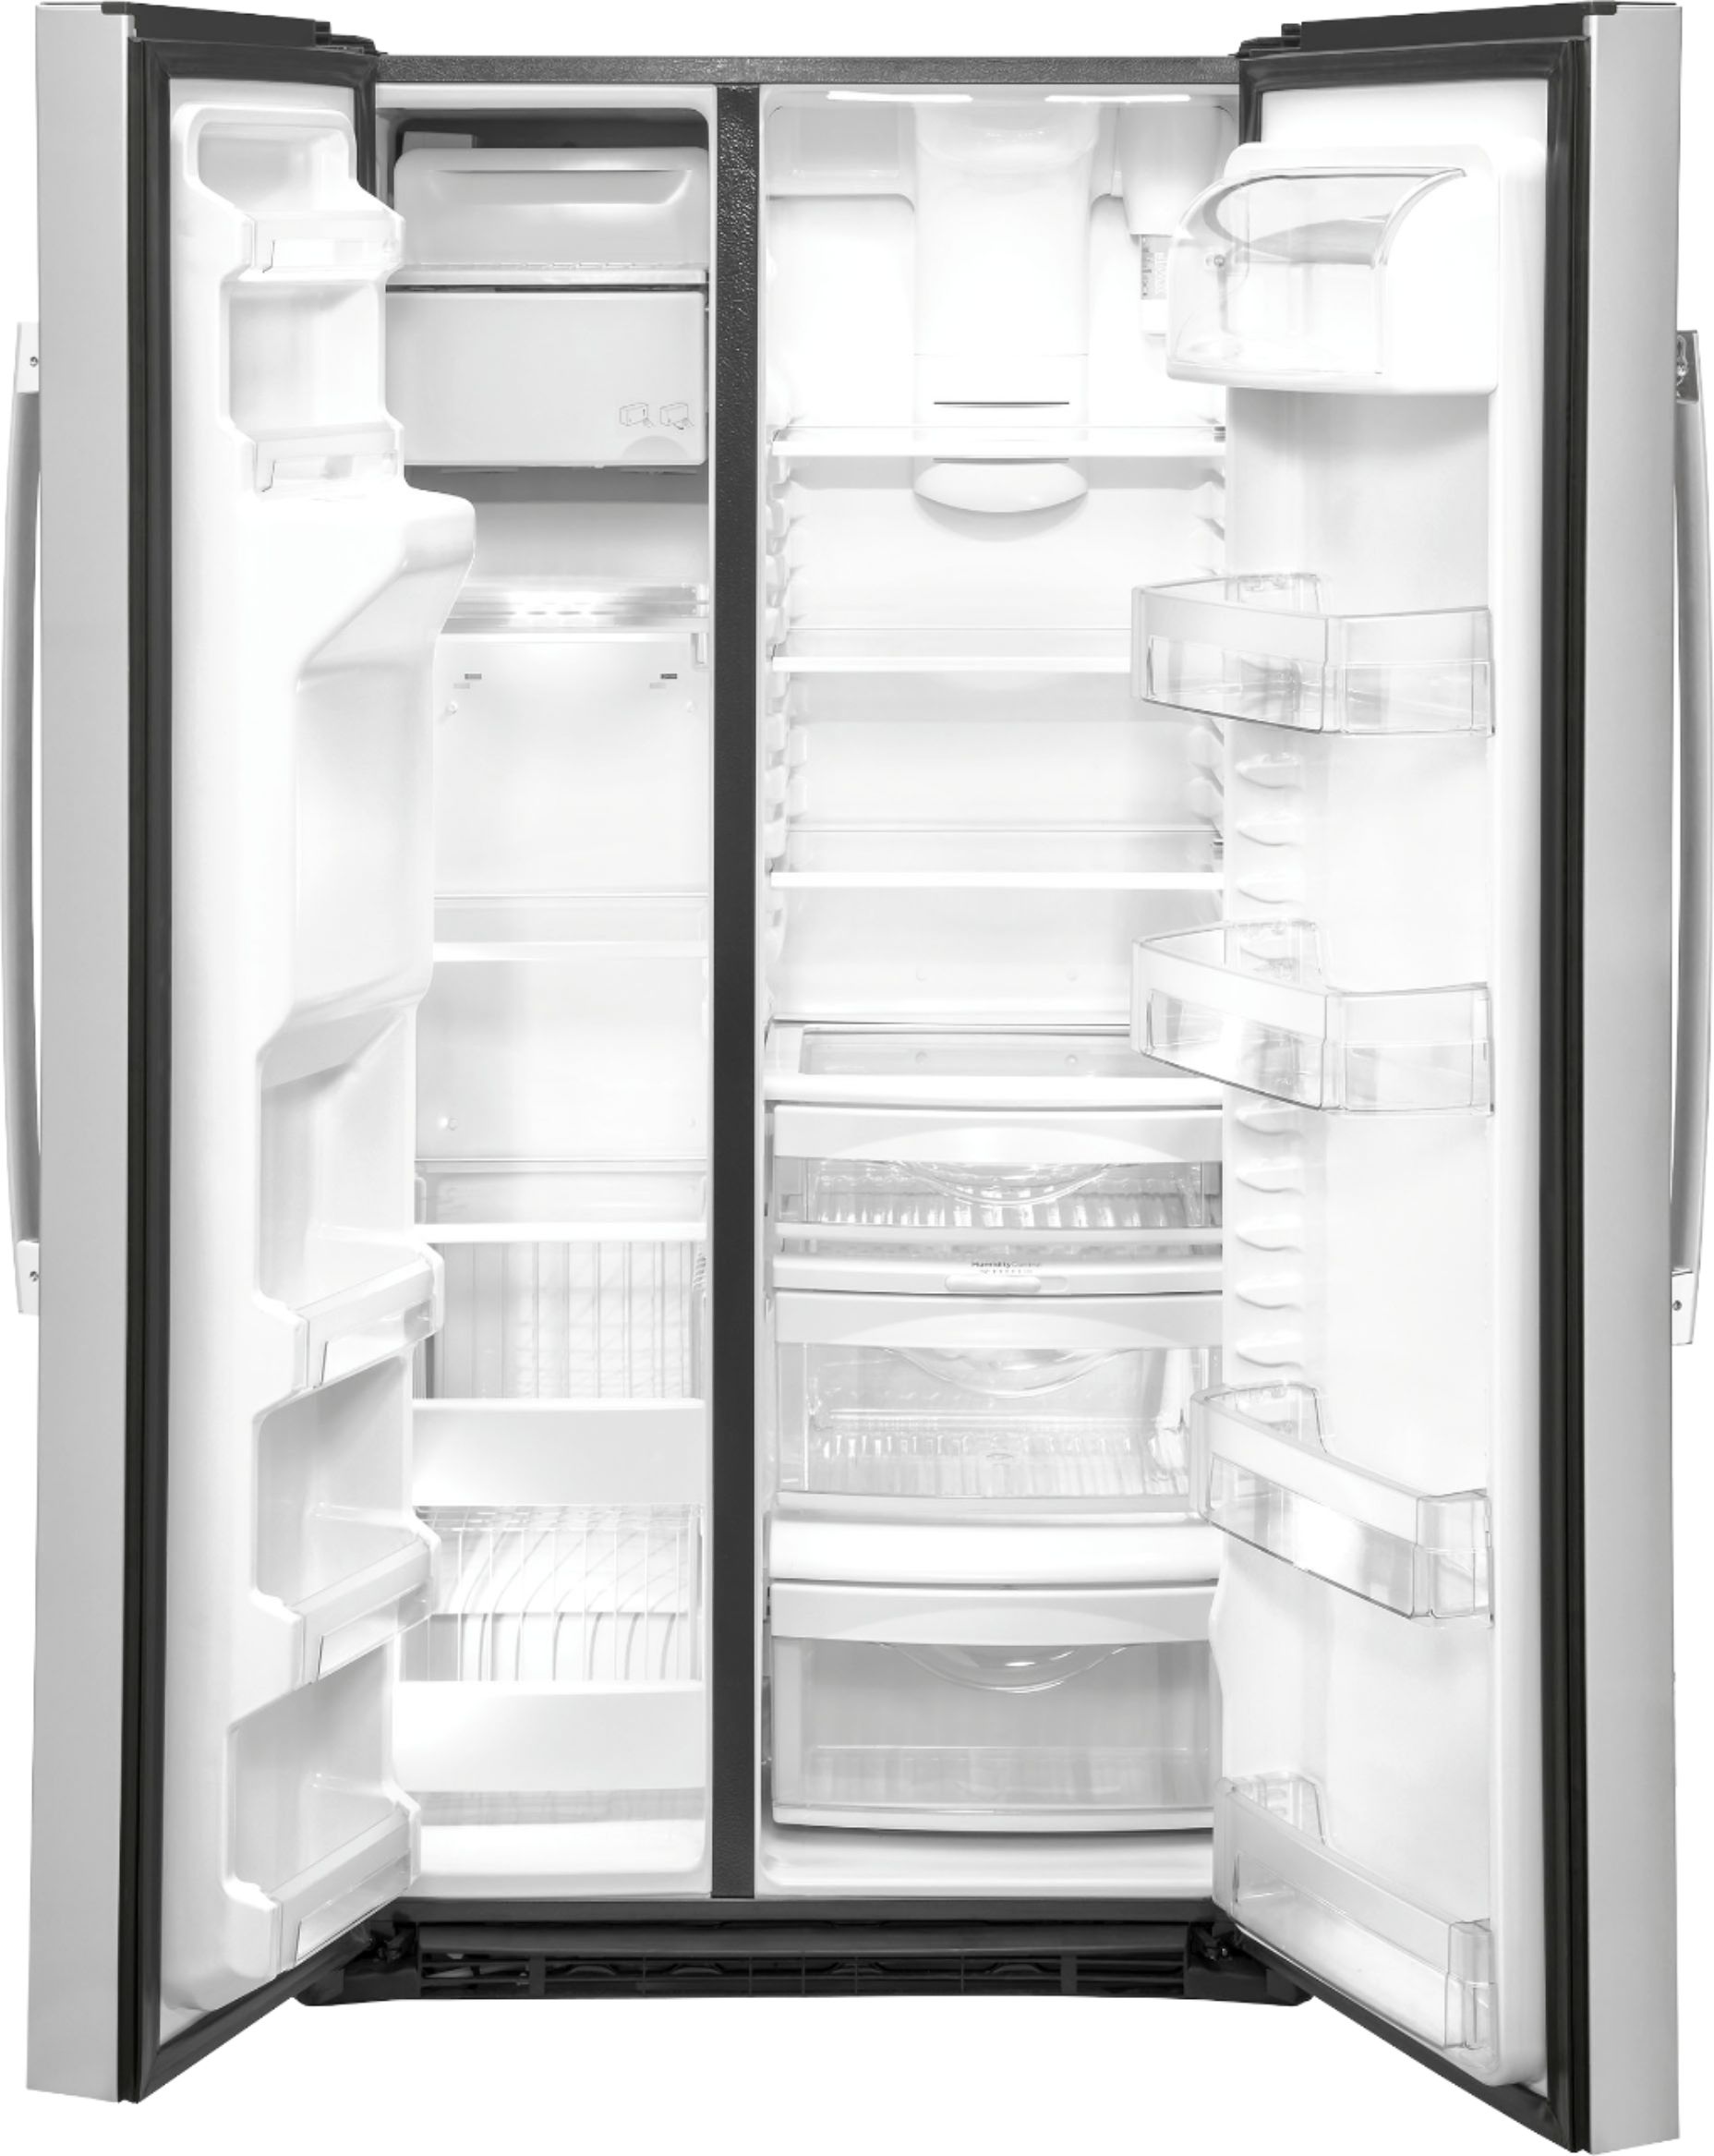 Left View: GE - 21.8 Cu. Ft. Side-by-Side Counter-Depth Refrigerator - Stainless steel